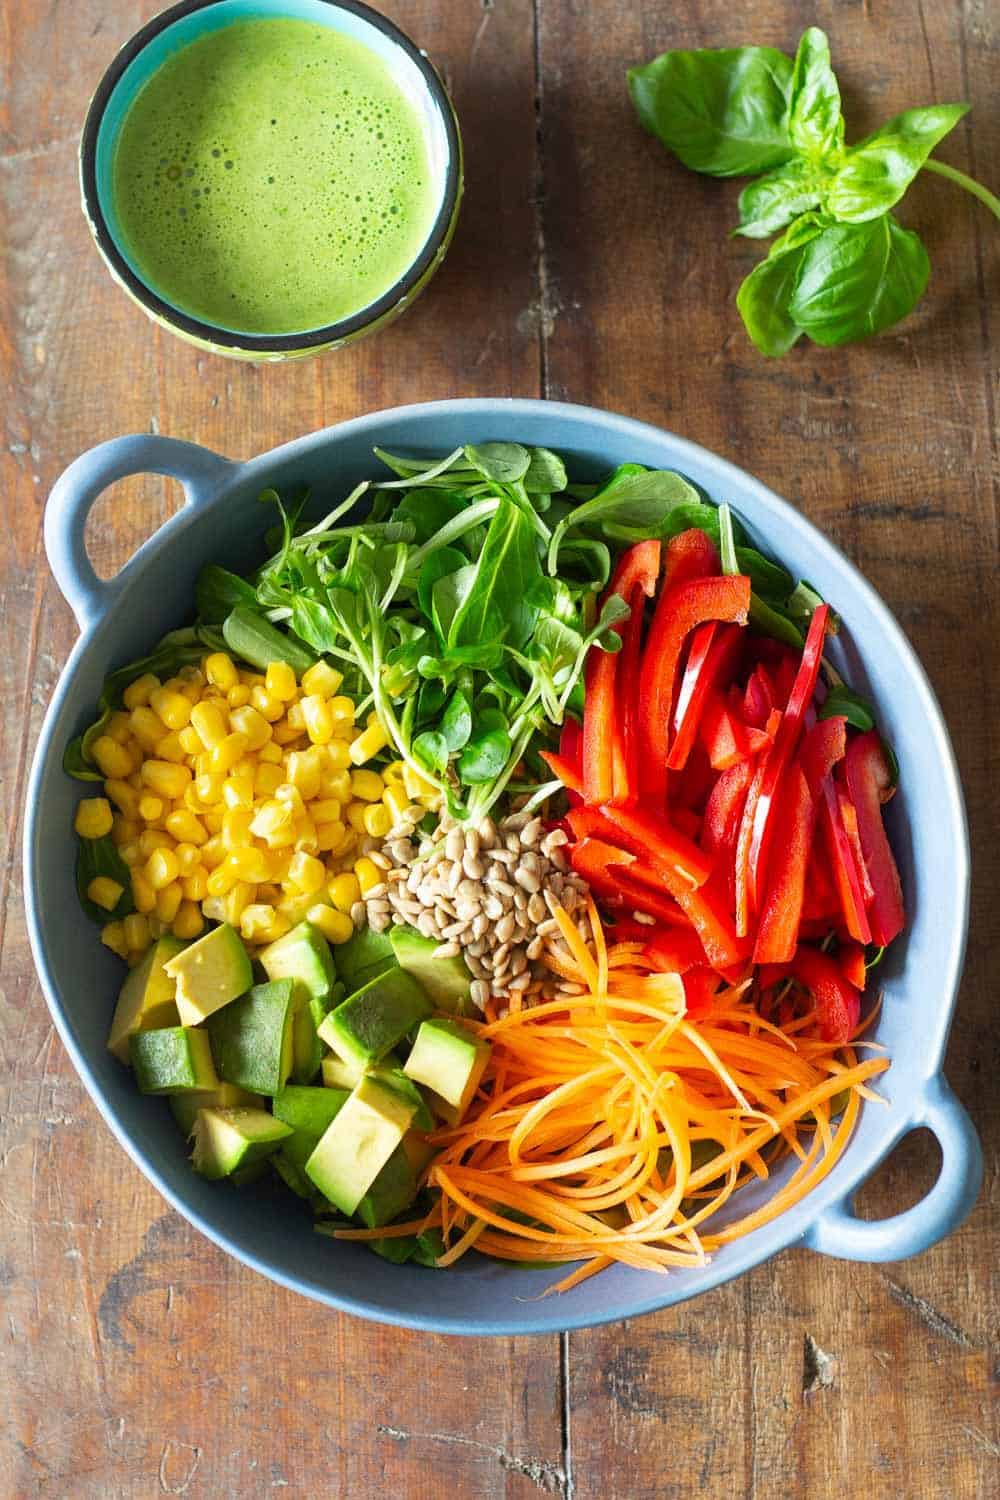 Ingredients for healthy summer salad with fresh vegetables in a light blue salad bowl, and a cup of orange basil vinaigrette.